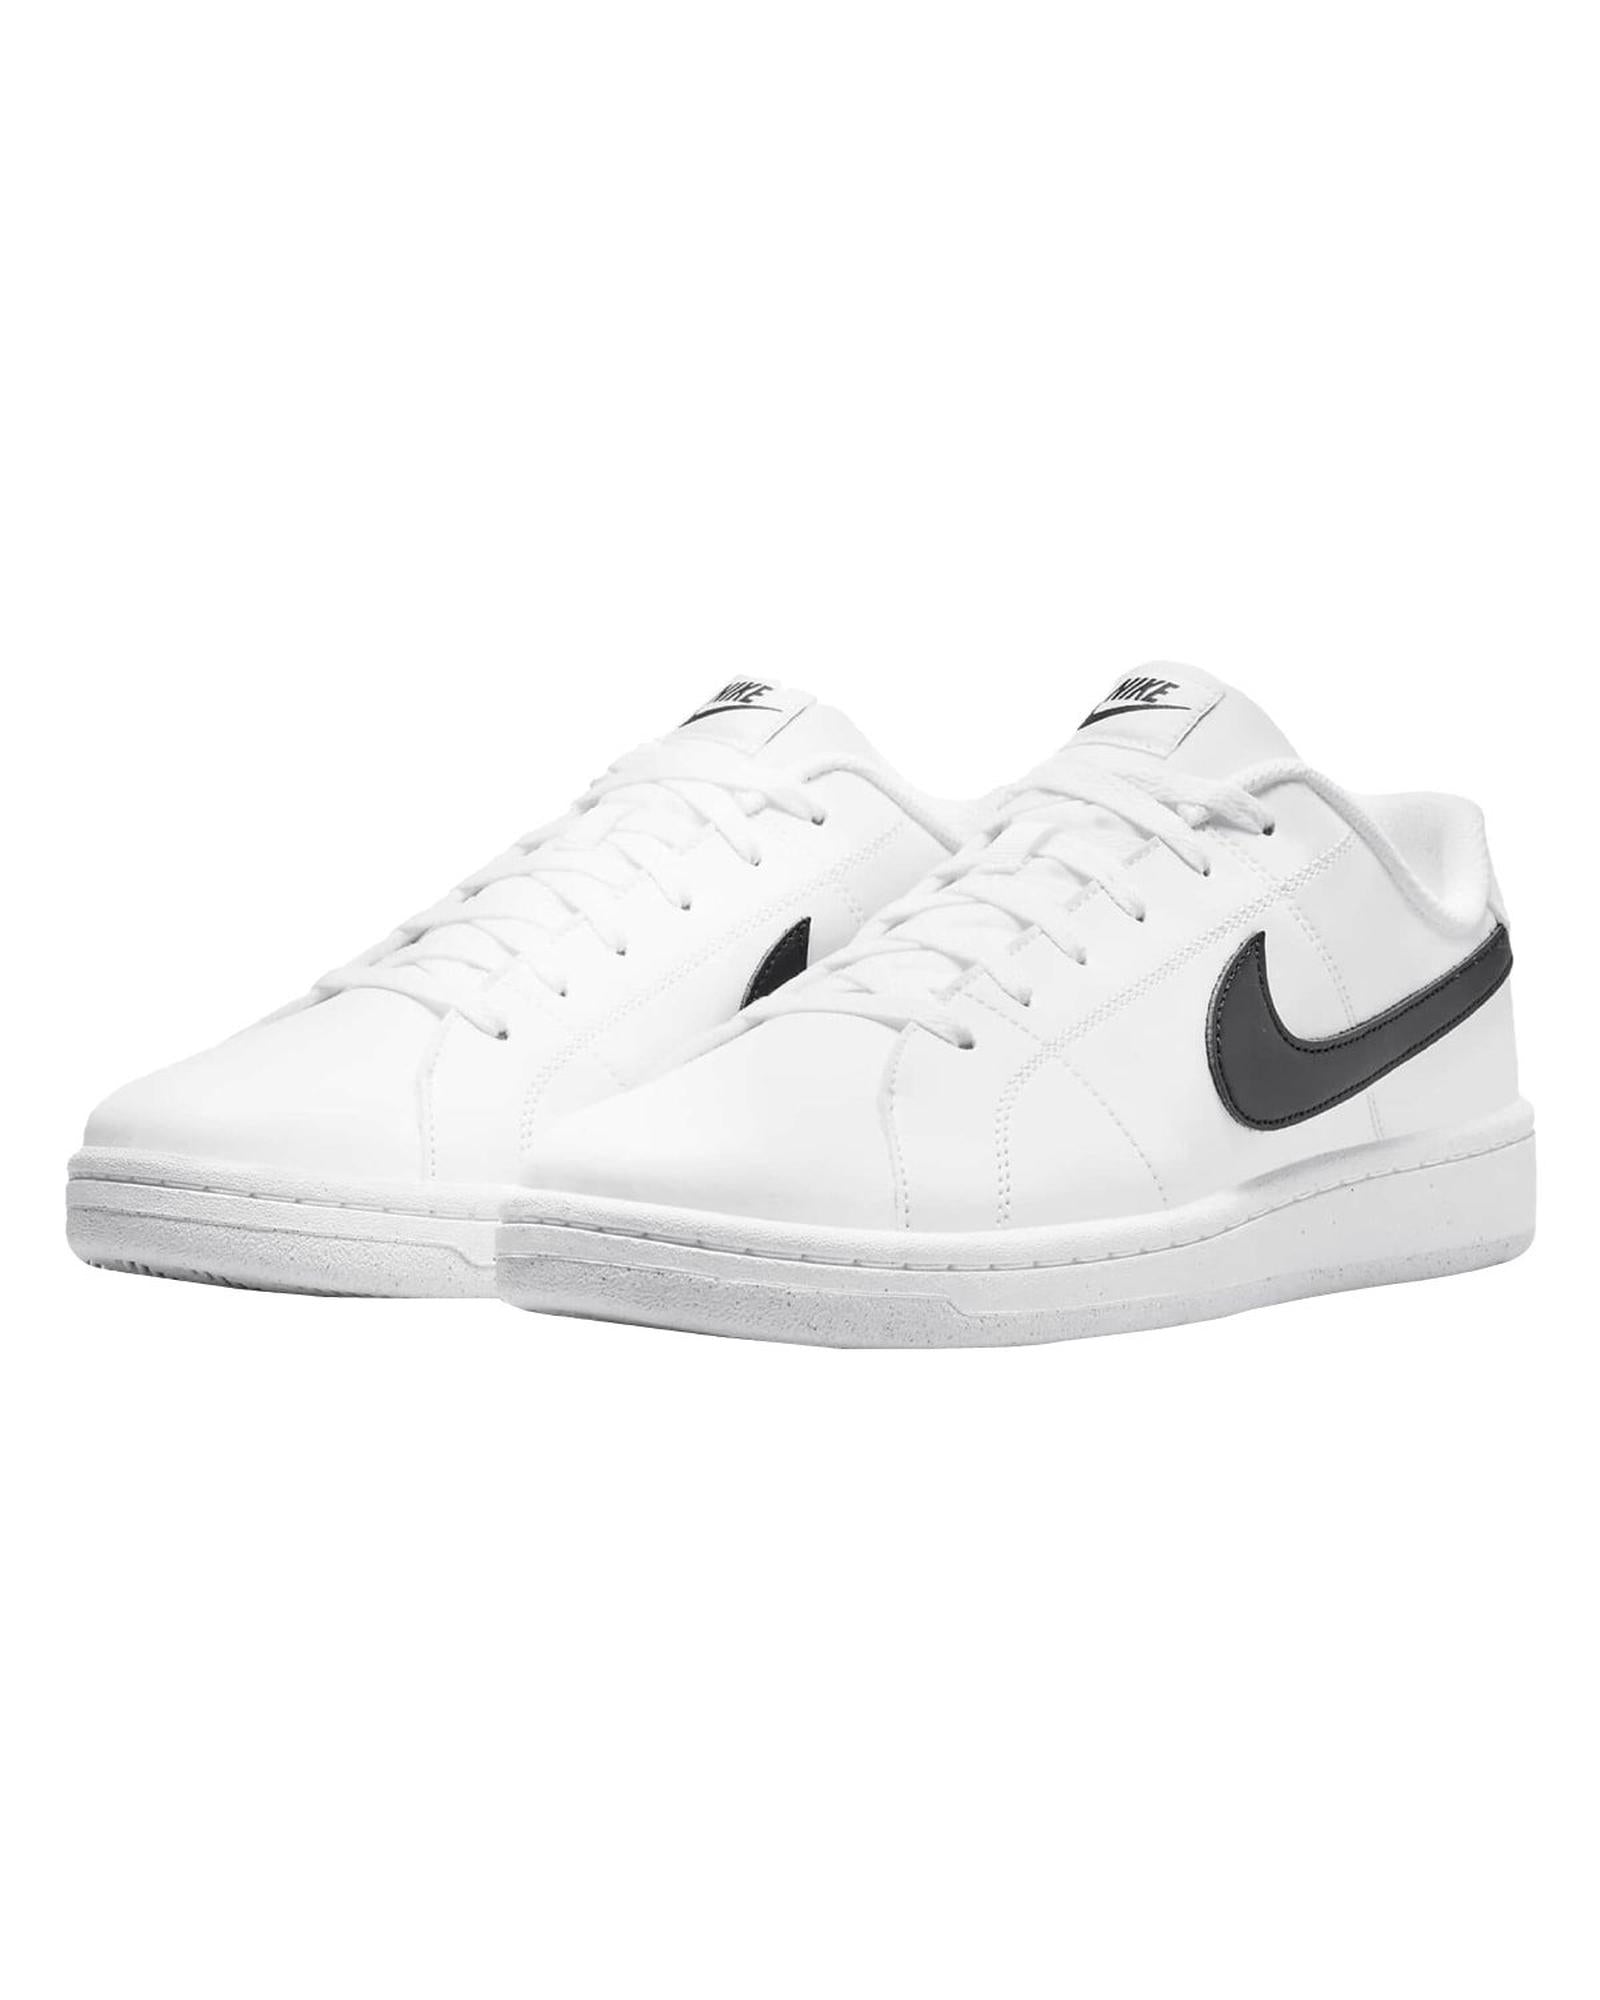 Nike Next Nature Casual Shoes with Herringbone Sole by Nike in White Black - 12 US